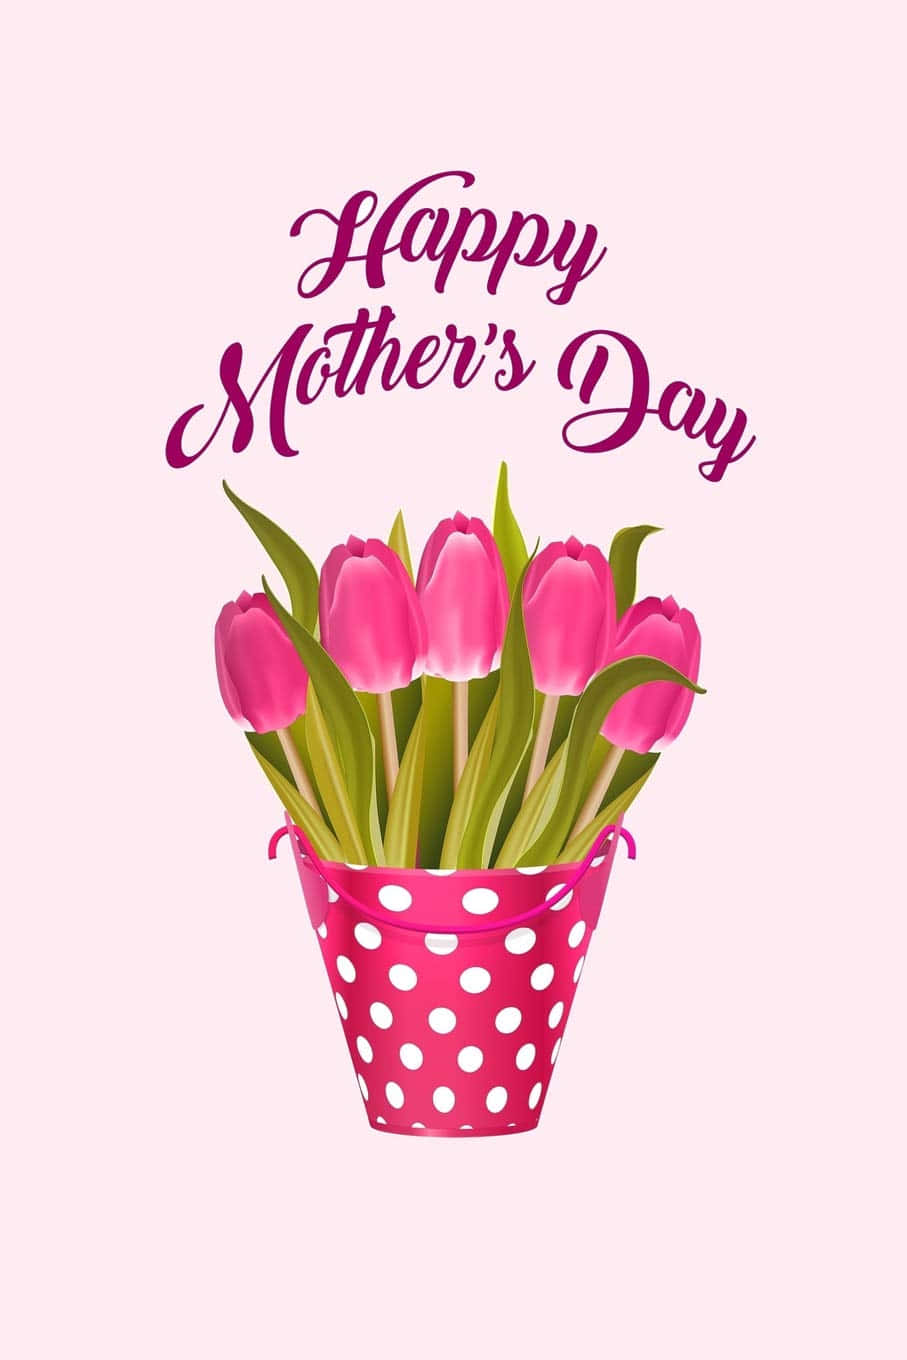 Give thanks and appreciate the love of all mothers this Mothers Day